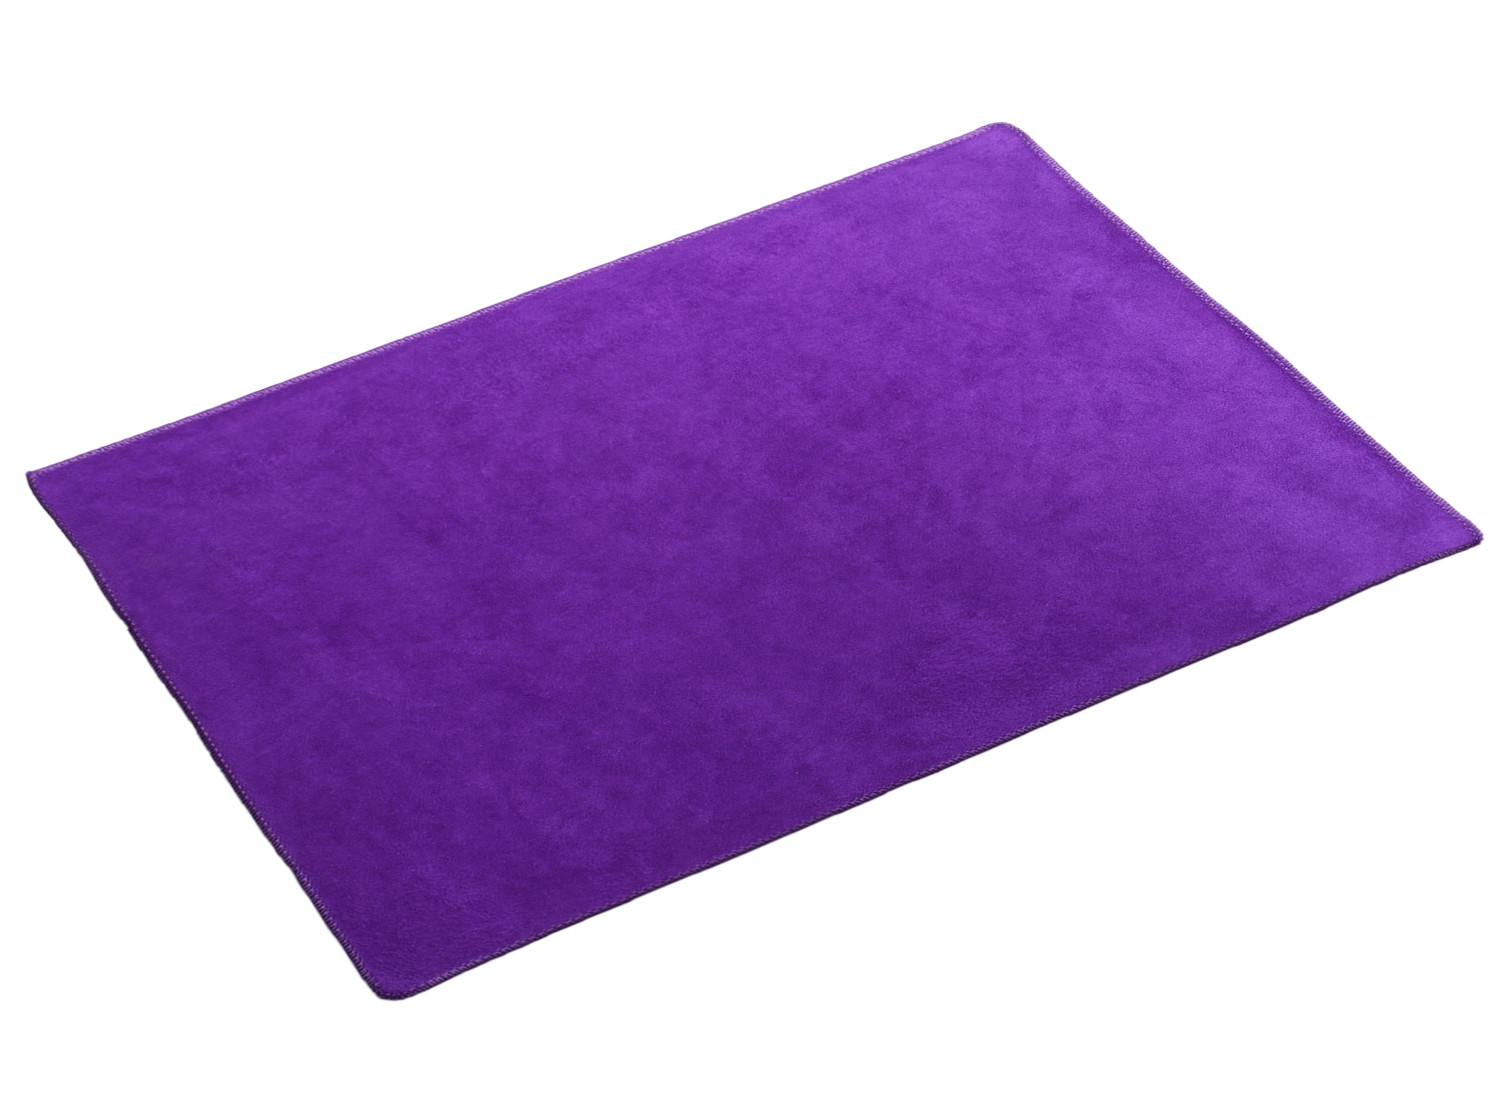 Kuber Industries Cleaning Cloths|Microfiber Highly Absorbent Wash Towels for Kitchen,Car,Window,24 x 16 Inch (Purple)